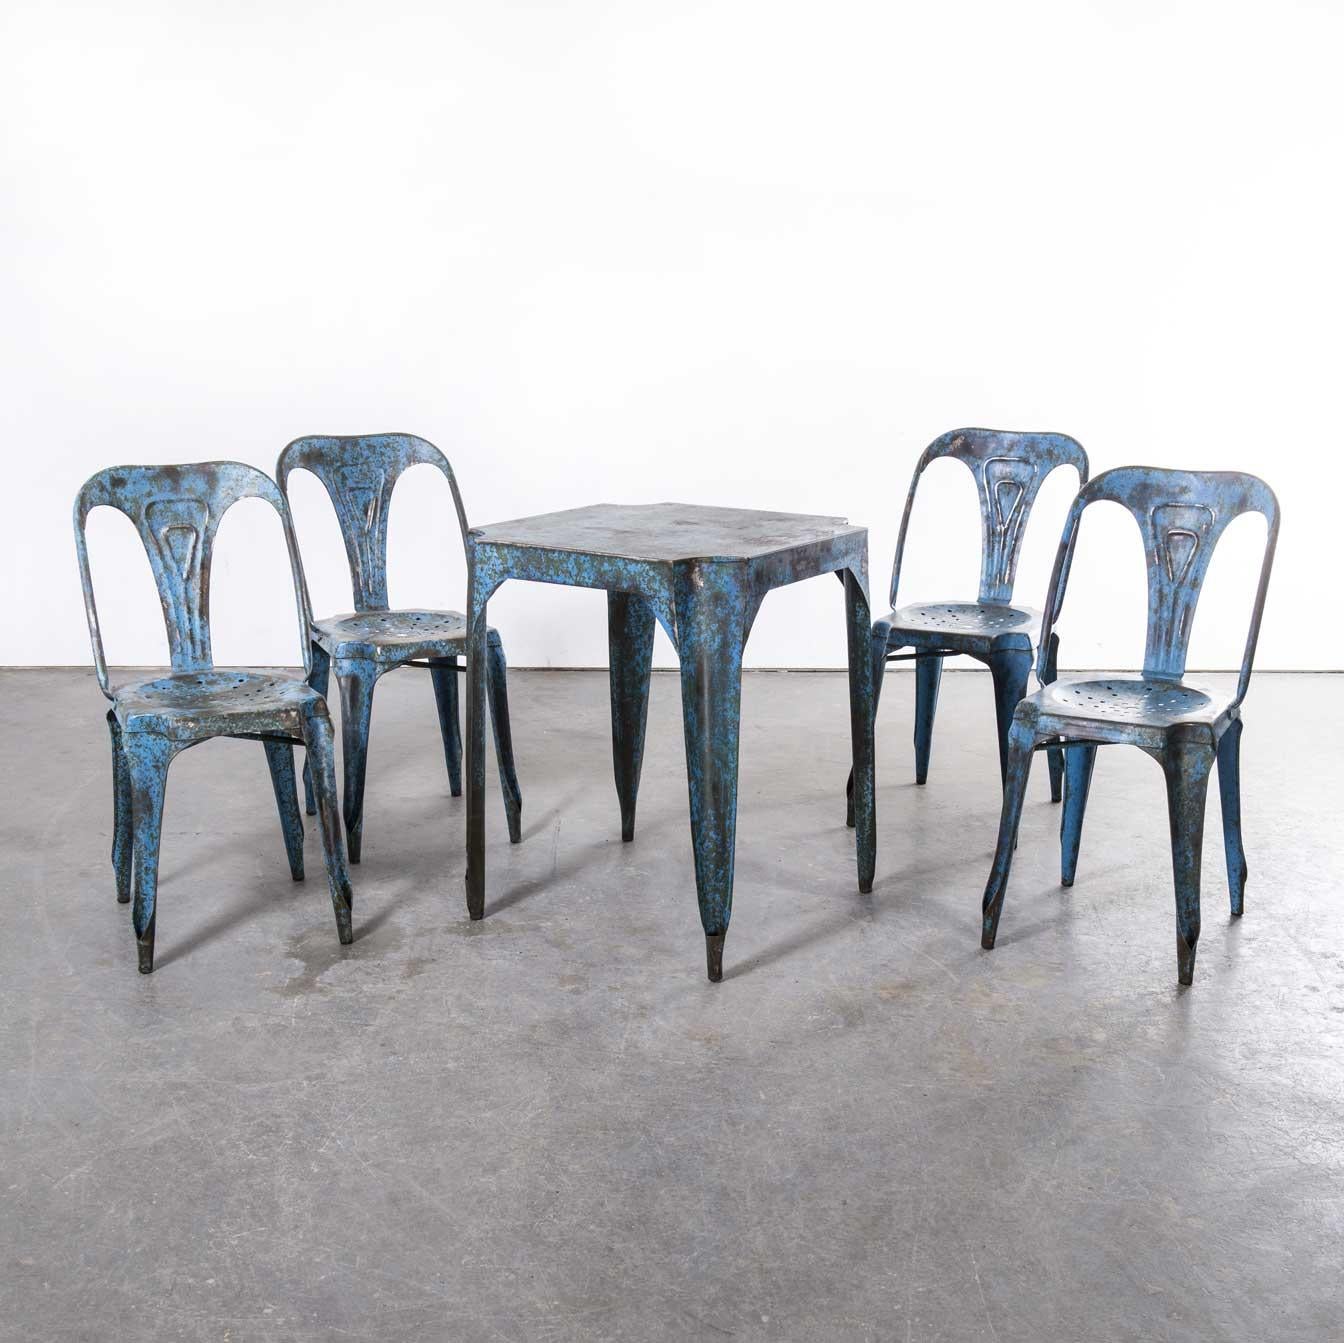 1950's Original French Multipl's Table And Chair Set - Blue For Sale 2